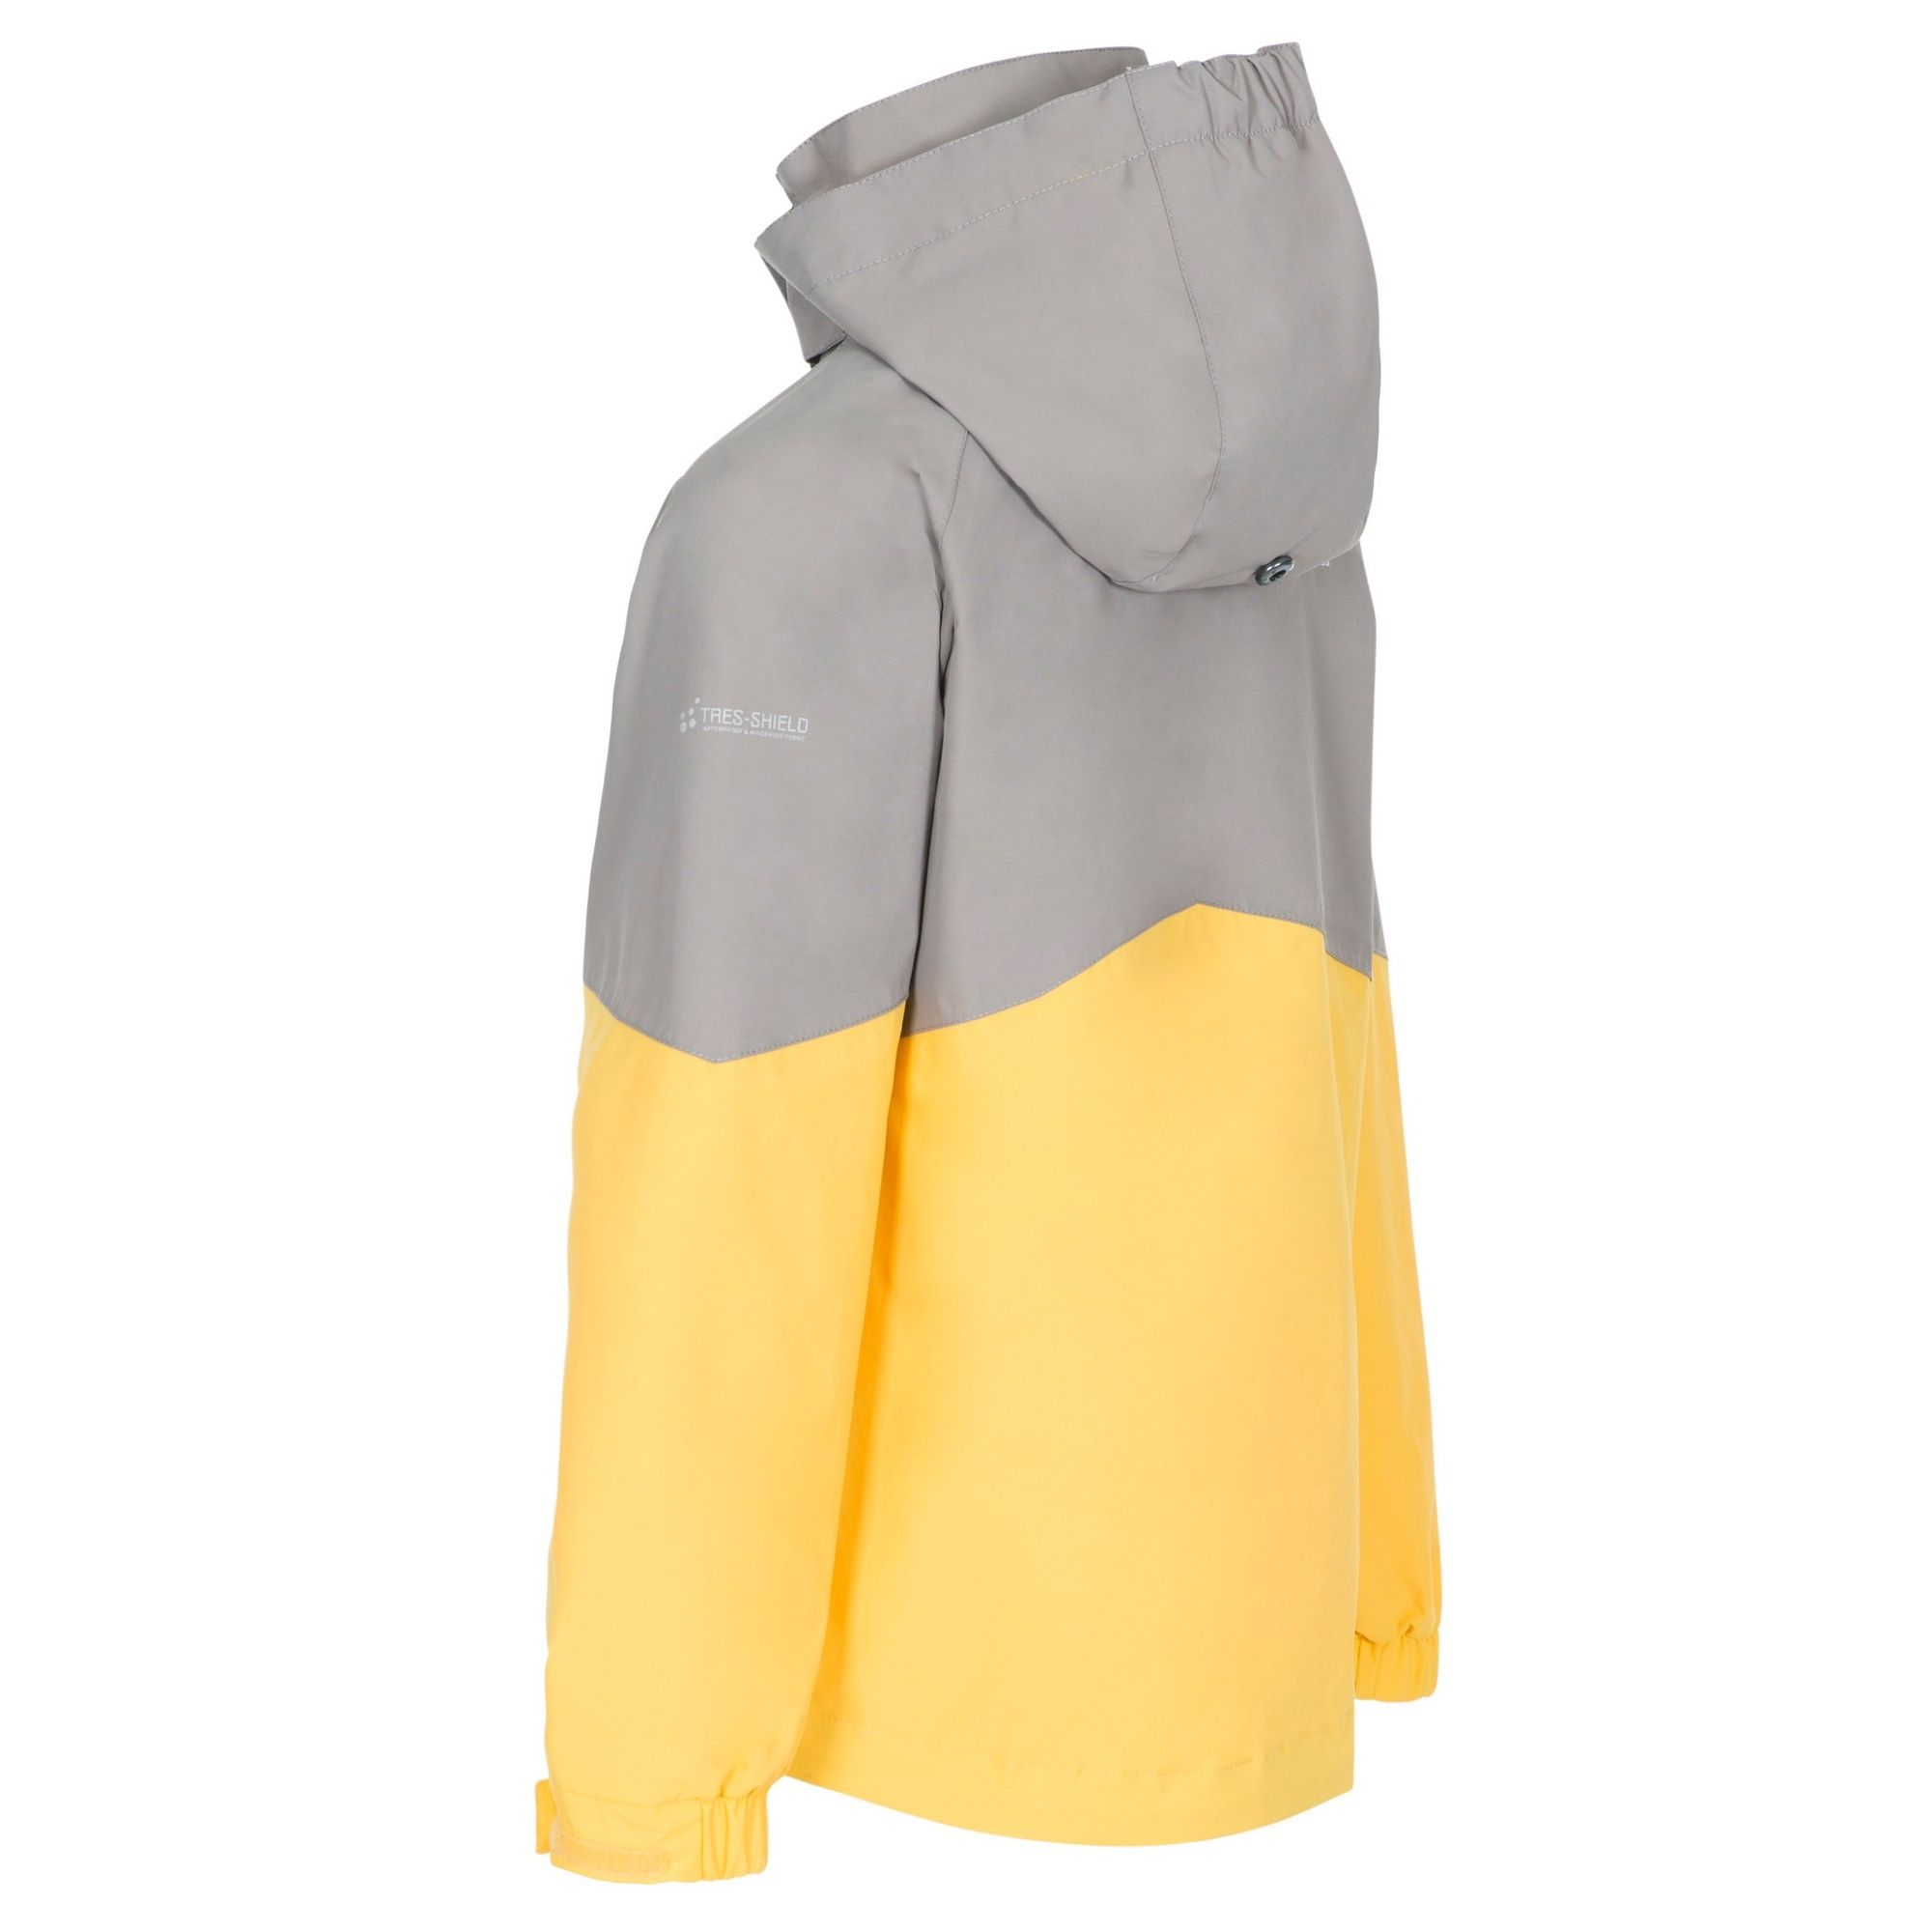 Shell: 100% Polyamide PU, Lining: 100% Polyester. 2 lower zip pockets. Detachable stud off hood. Adjustable cuffs with touch fastening tab. Contrast lining. Waterproof 3000mm, windproof, taped seams. Trespass Childrens Chest Sizing (approx): 2-3 Years - 21in/53cm, 3-4 Years - 22in/56cm, 5-6 Years - 24in/61cm, 7-8 Years - 26in/66cm, 9-10 Years - 28in/71cm, 11-12 Years - 31in/79cm.